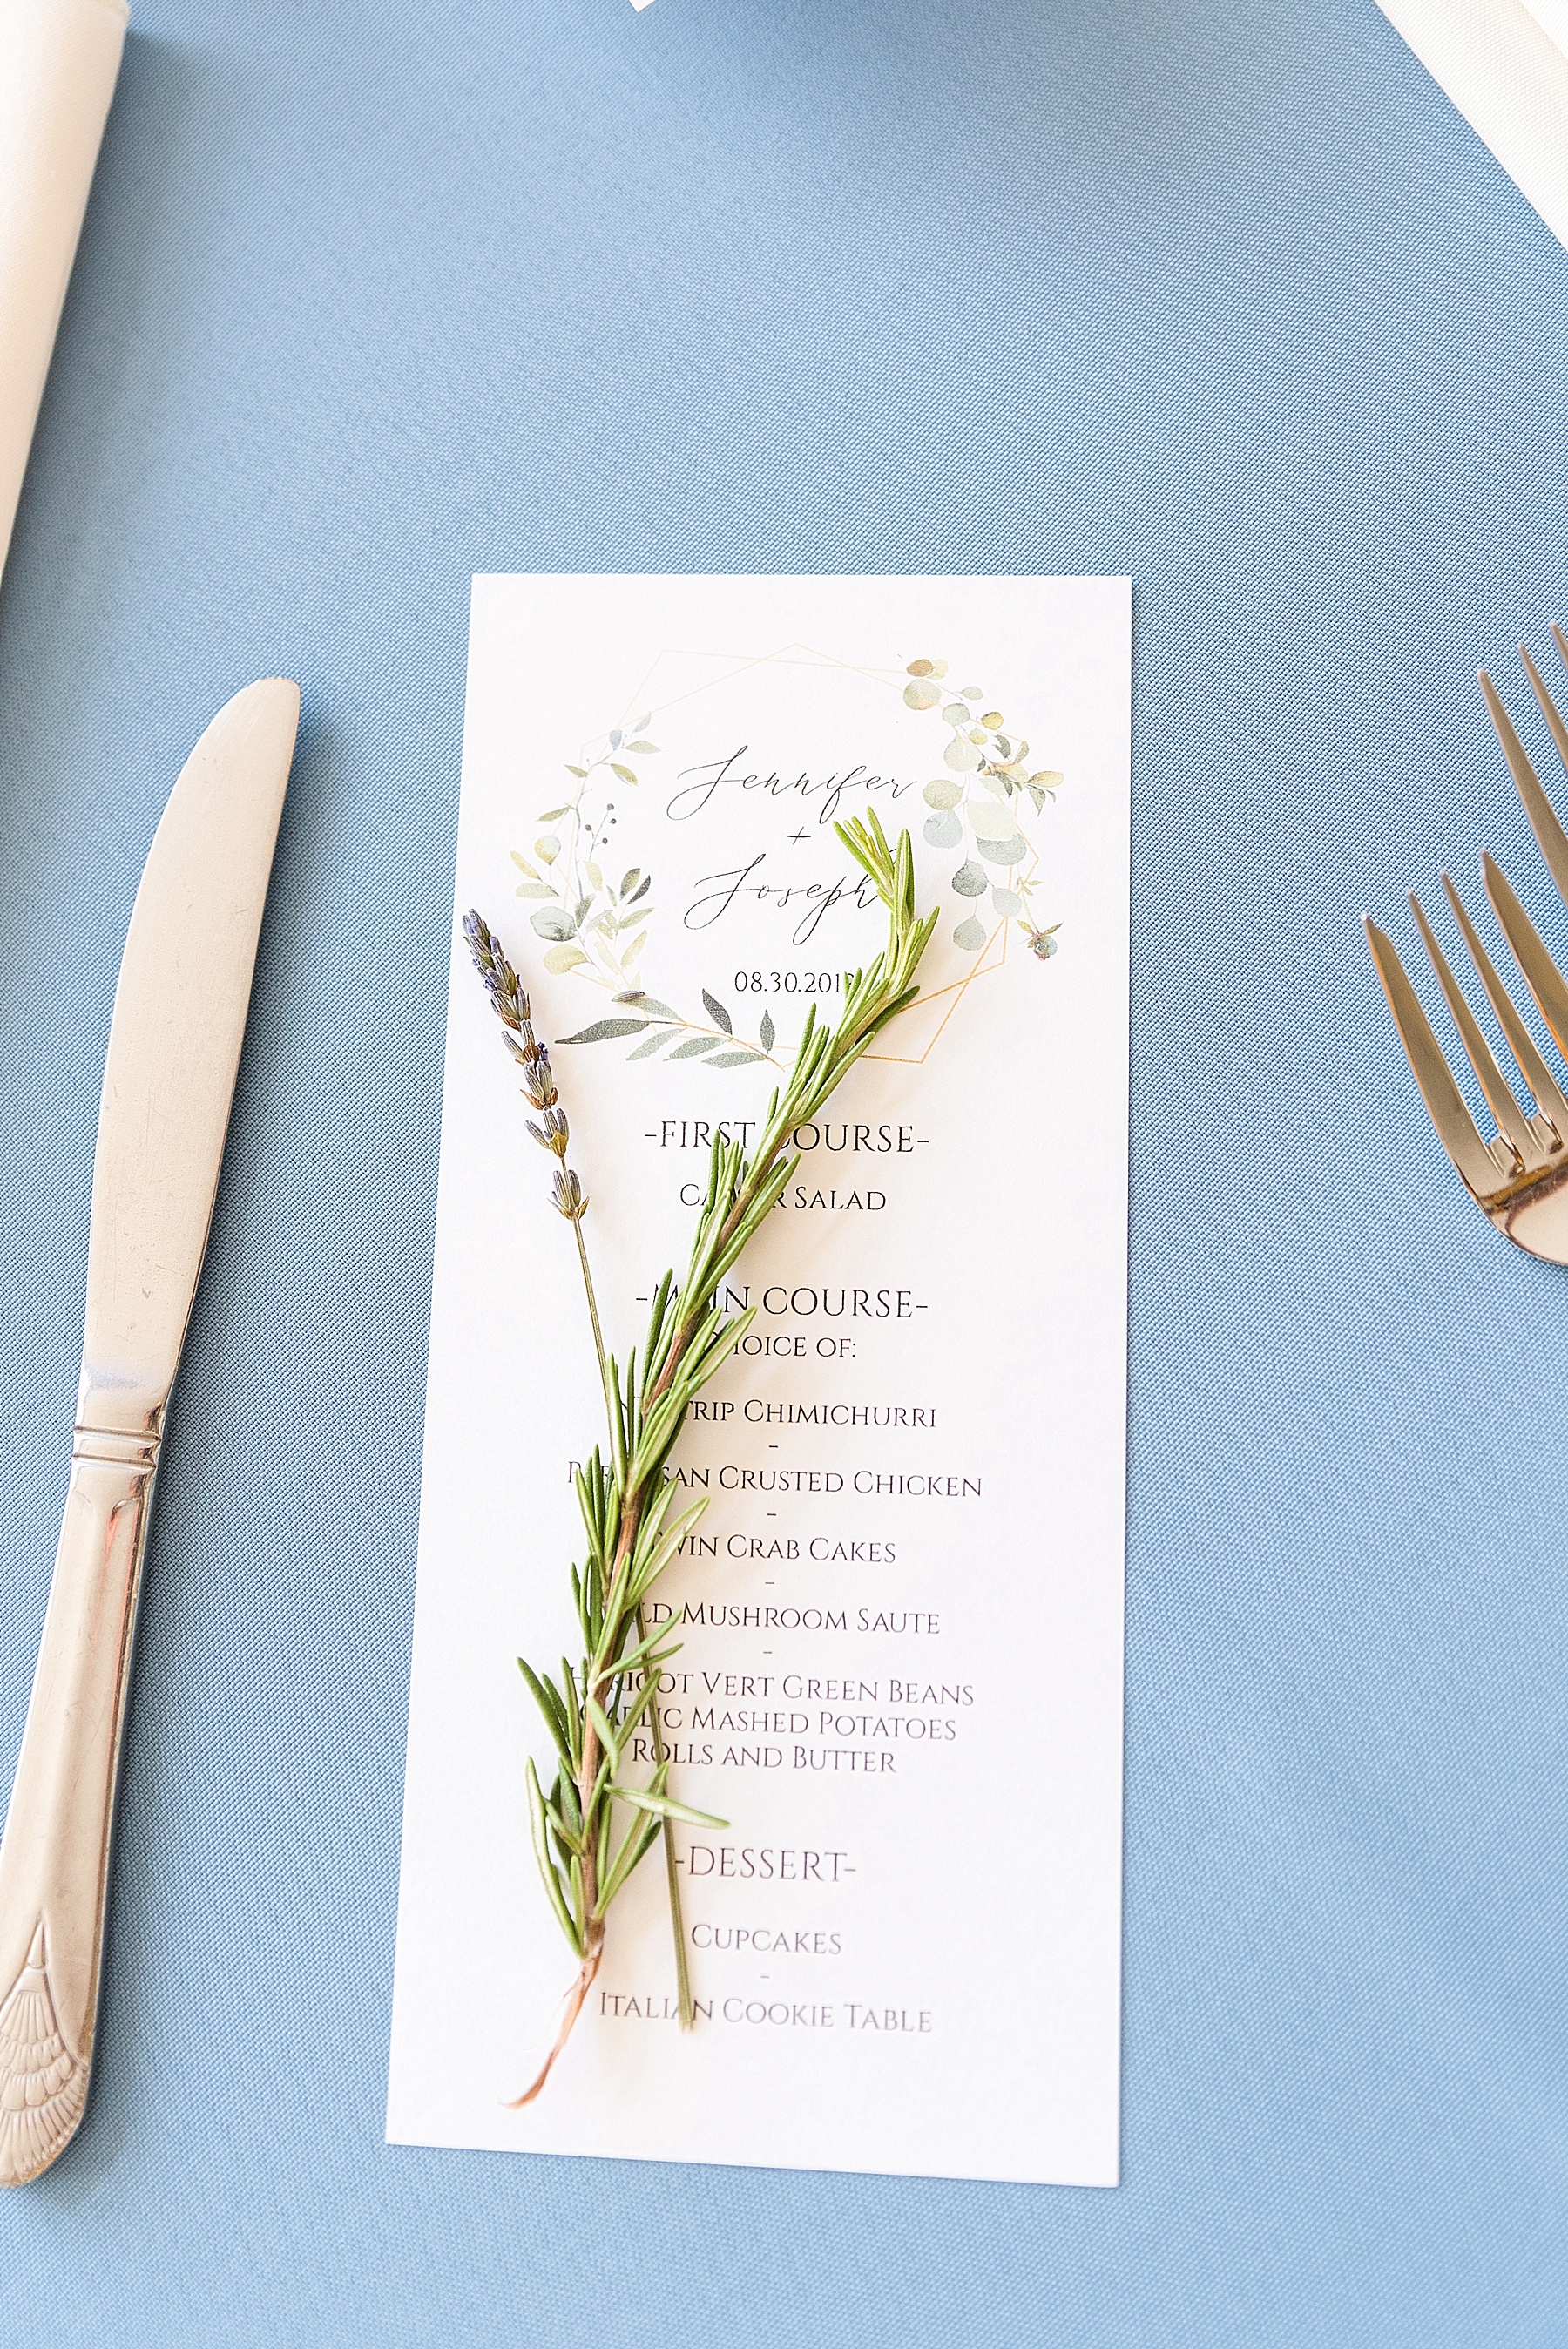 place setting details photographed by Alexandra Mandato Photography